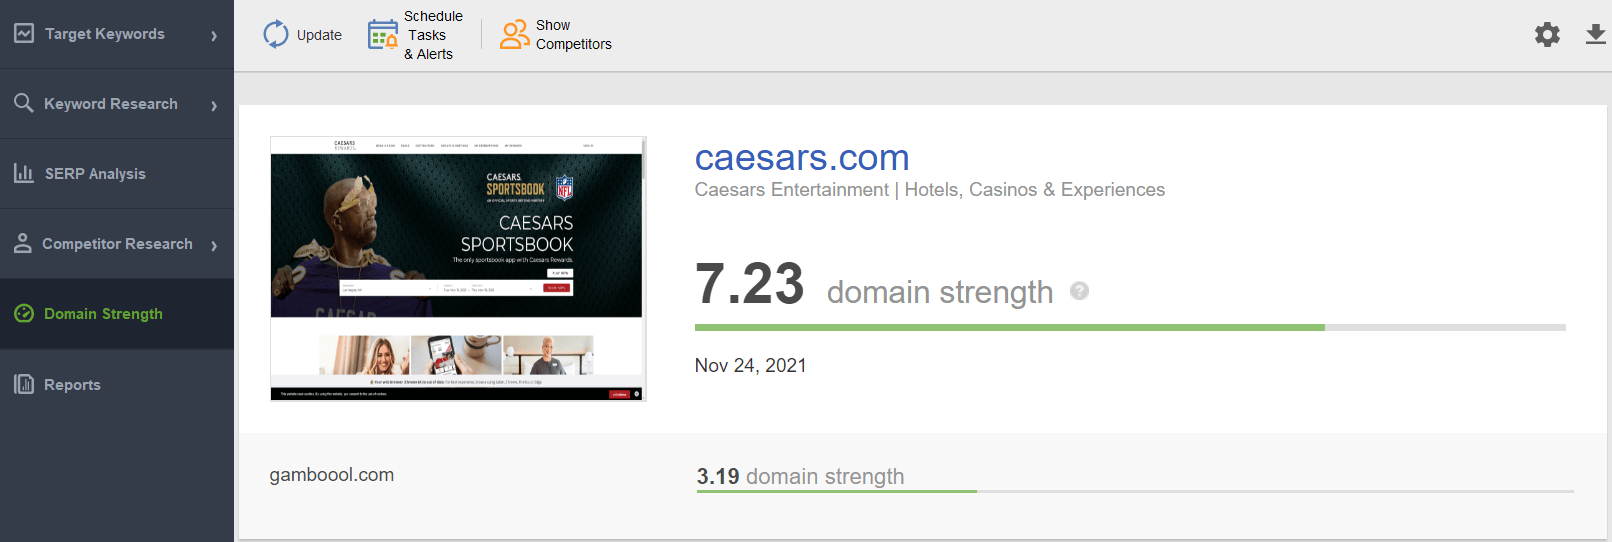 Overall domain strength